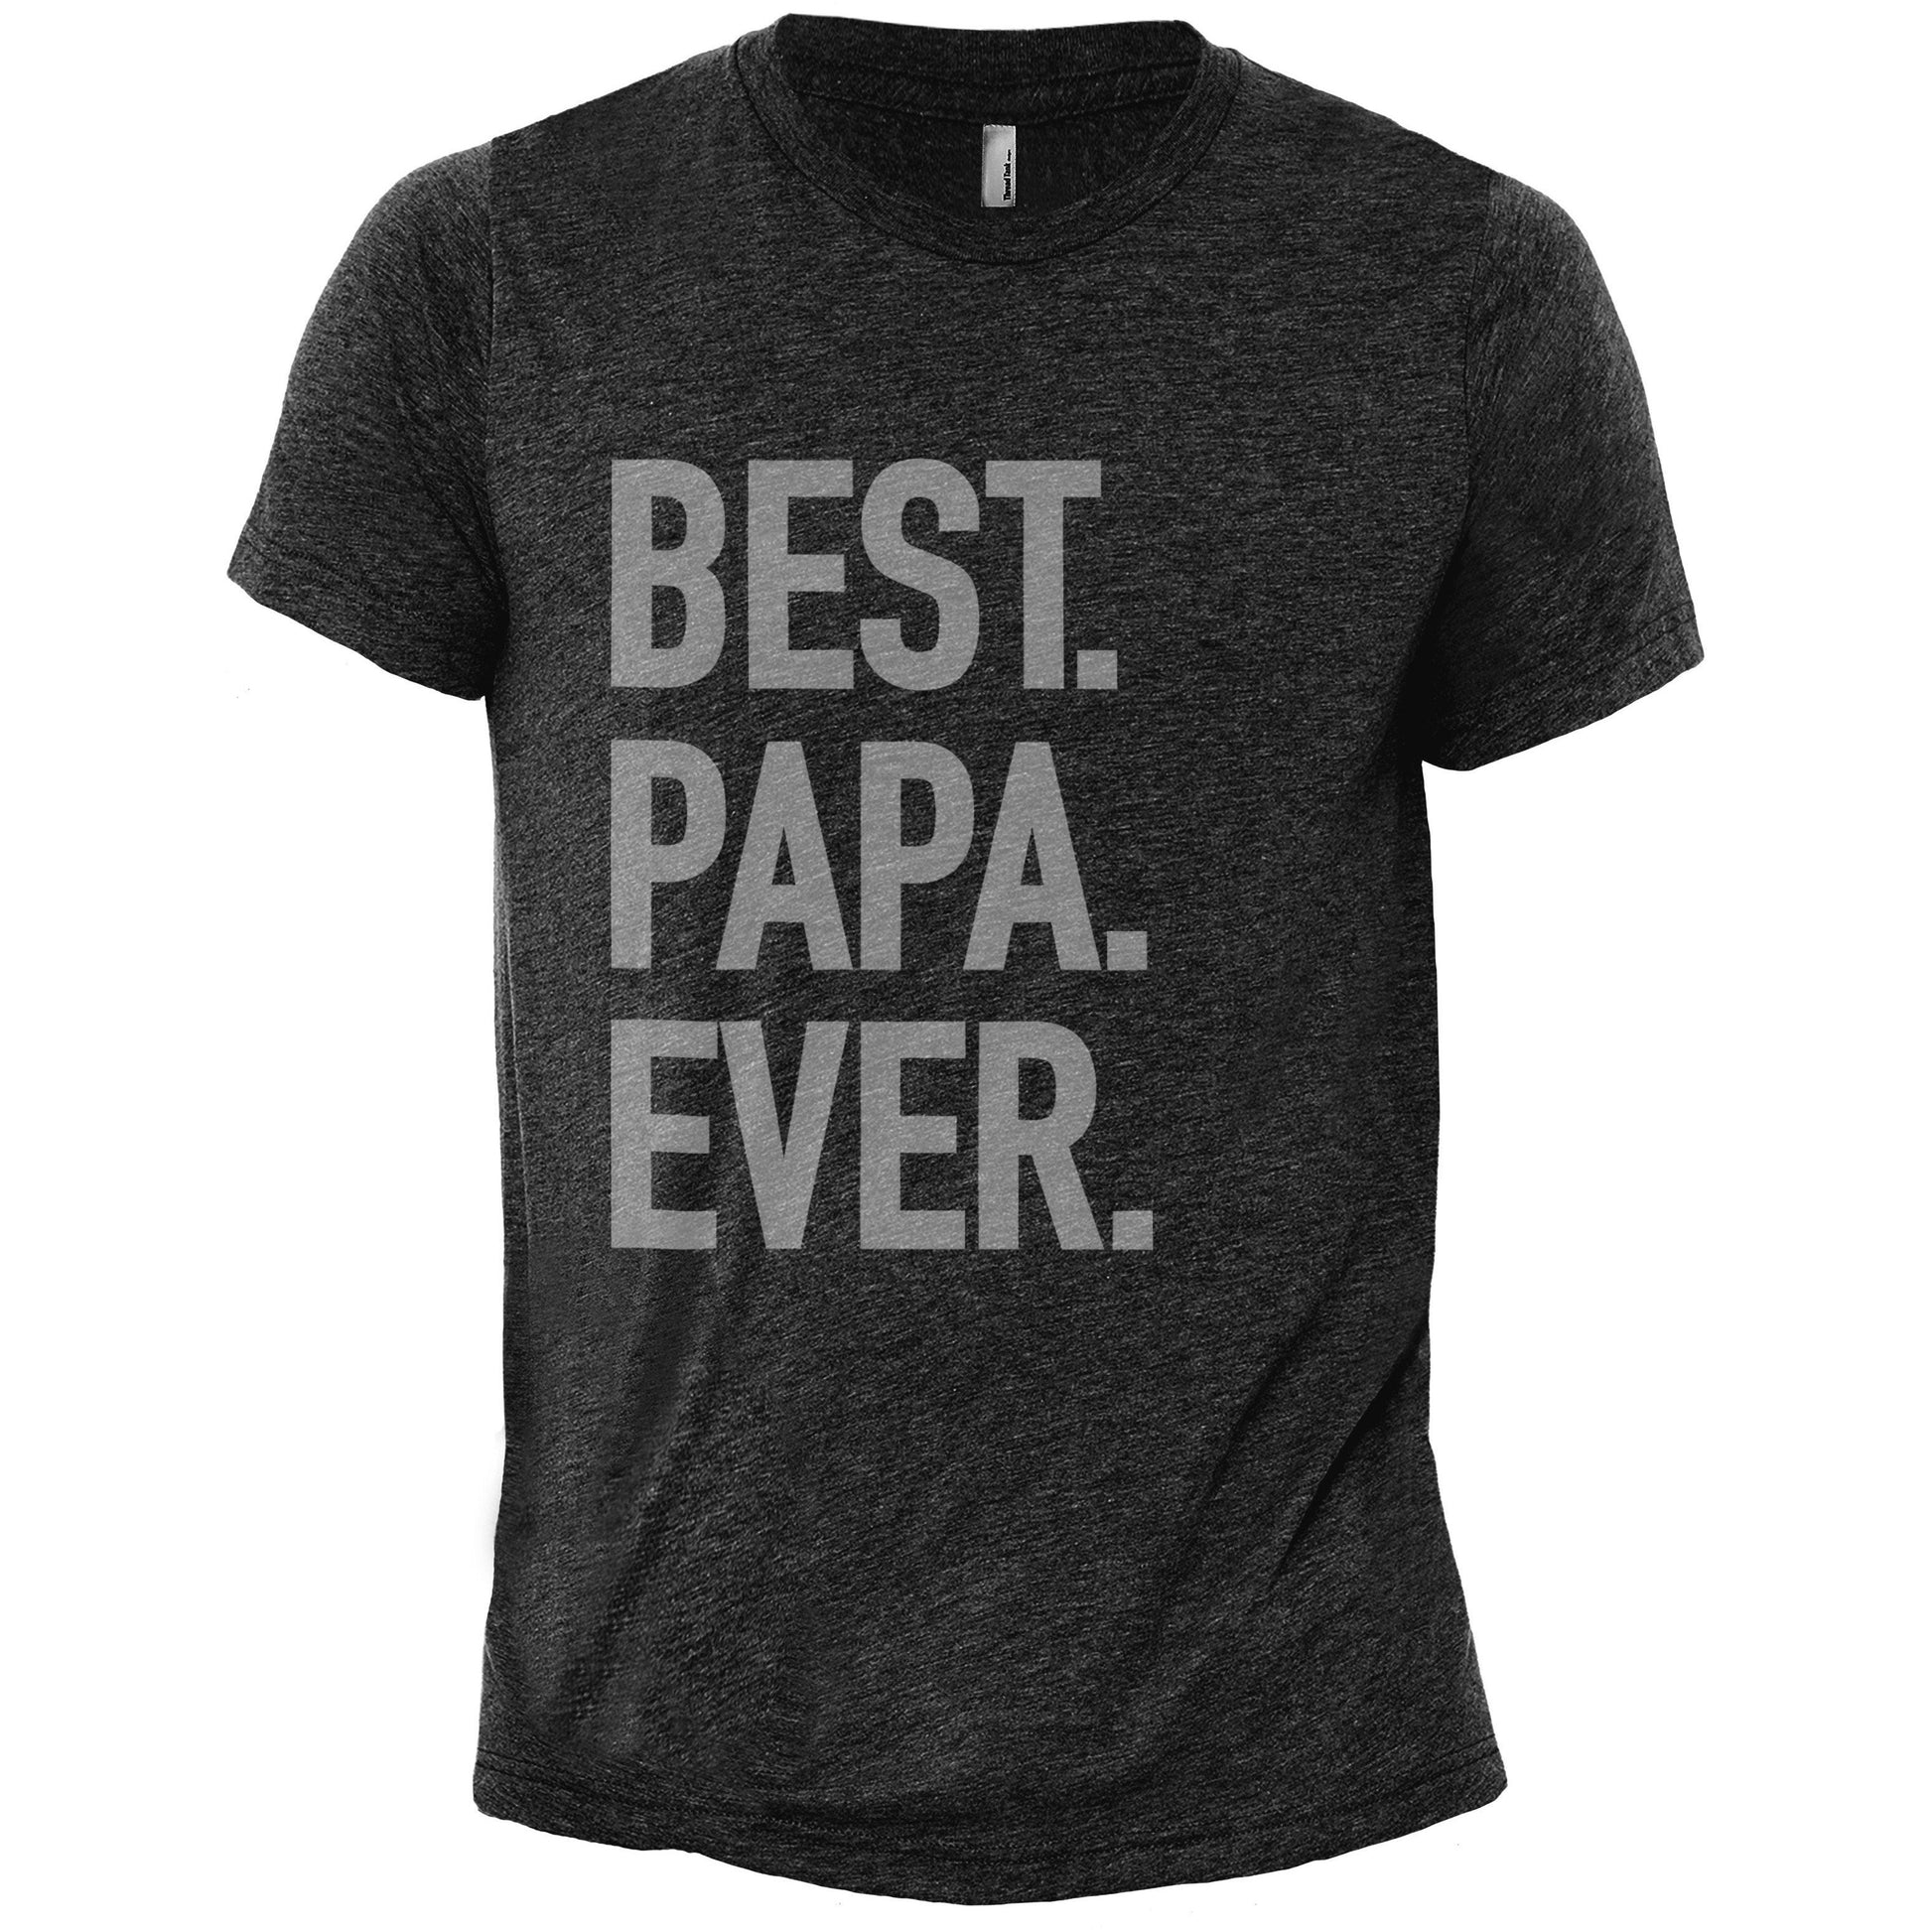 Best Papa Ever Charcoal Printed Graphic Men's Crew T-Shirt Tee